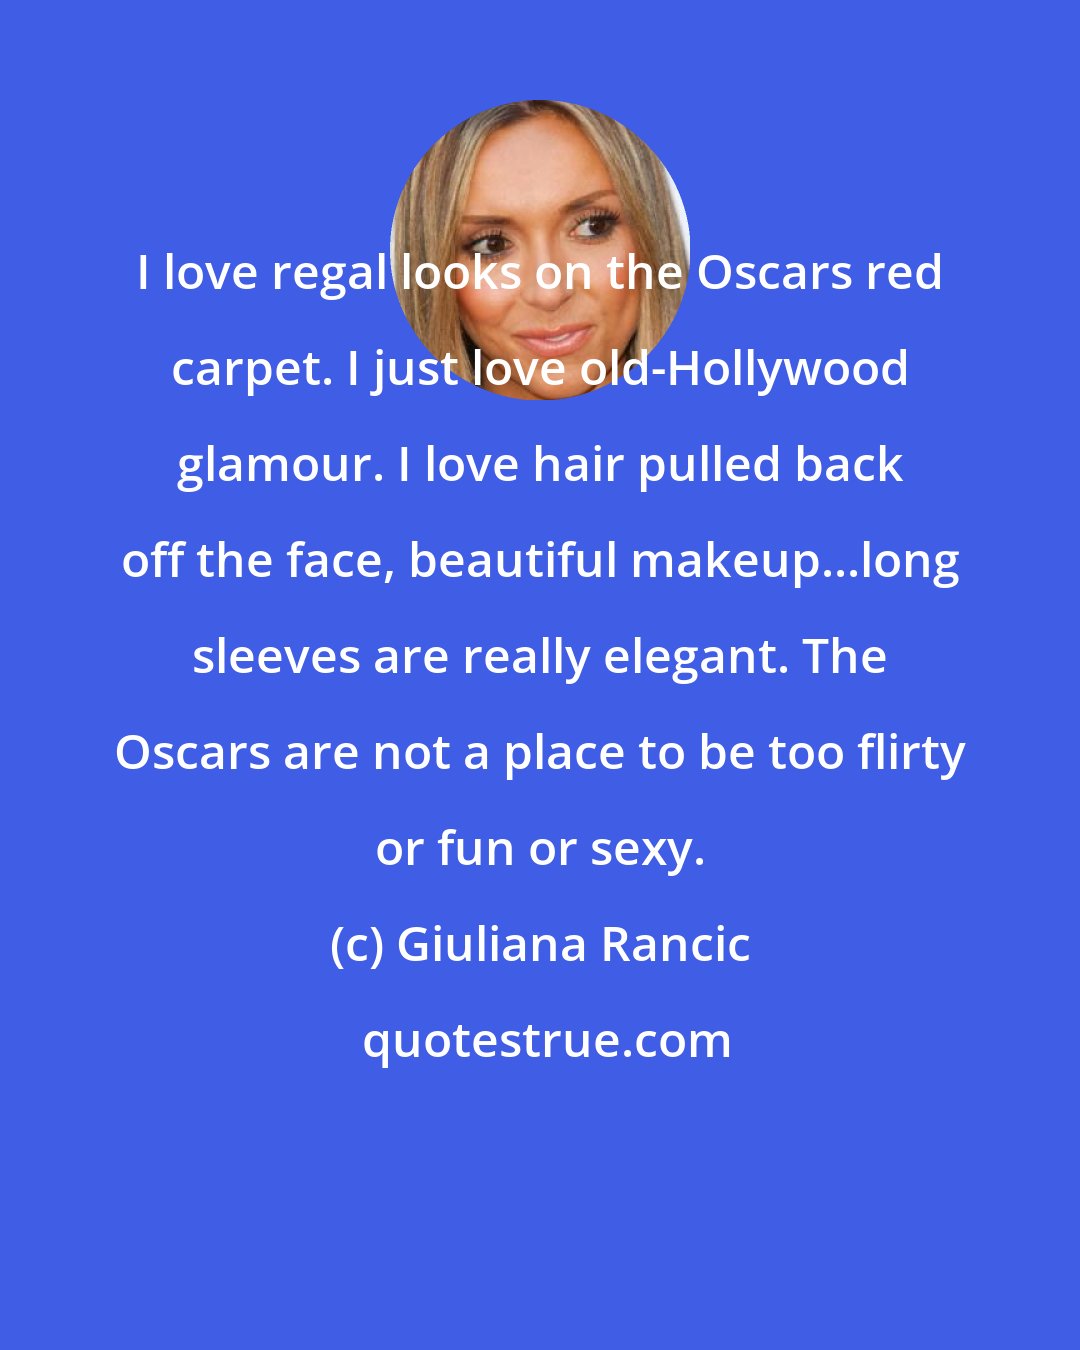 Giuliana Rancic: I love regal looks on the Oscars red carpet. I just love old-Hollywood glamour. I love hair pulled back off the face, beautiful makeup...long sleeves are really elegant. The Oscars are not a place to be too flirty or fun or sexy.